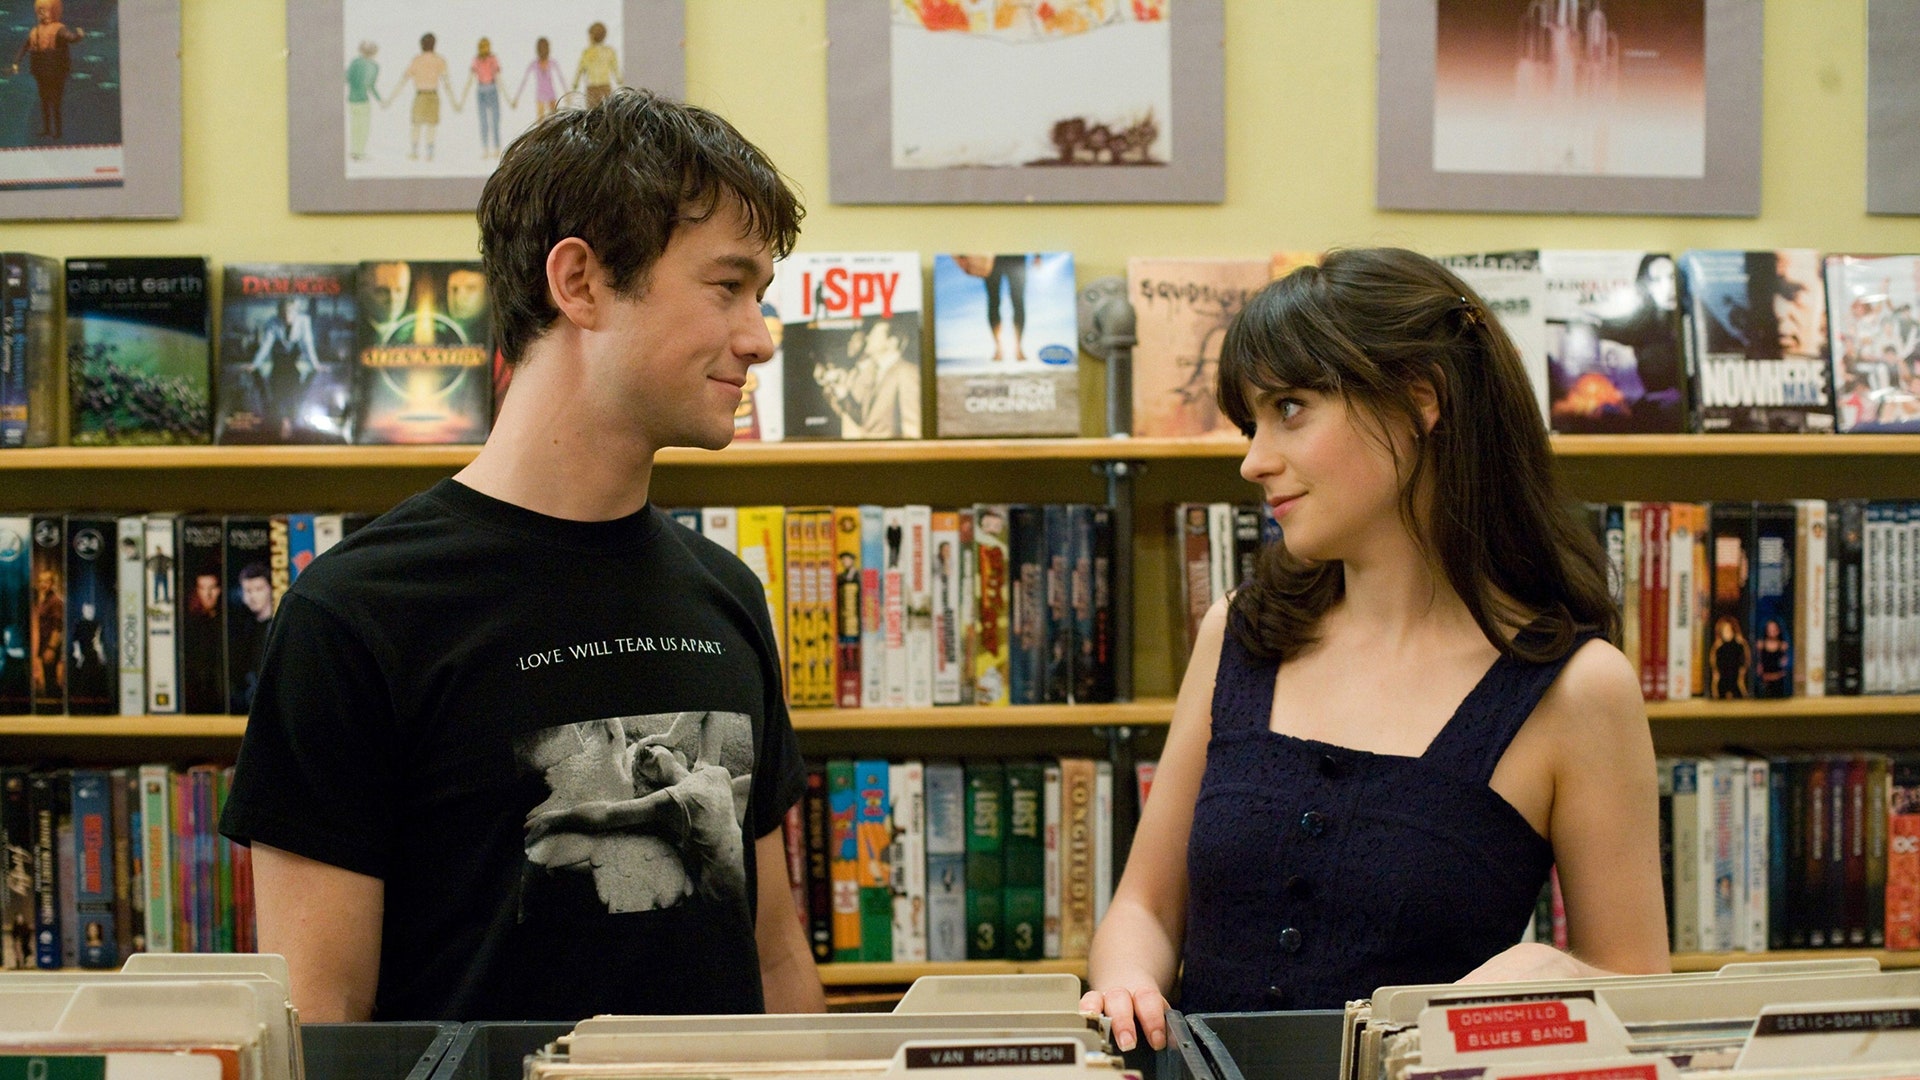 500 days of summer - Ispy Love Walter Ant Est